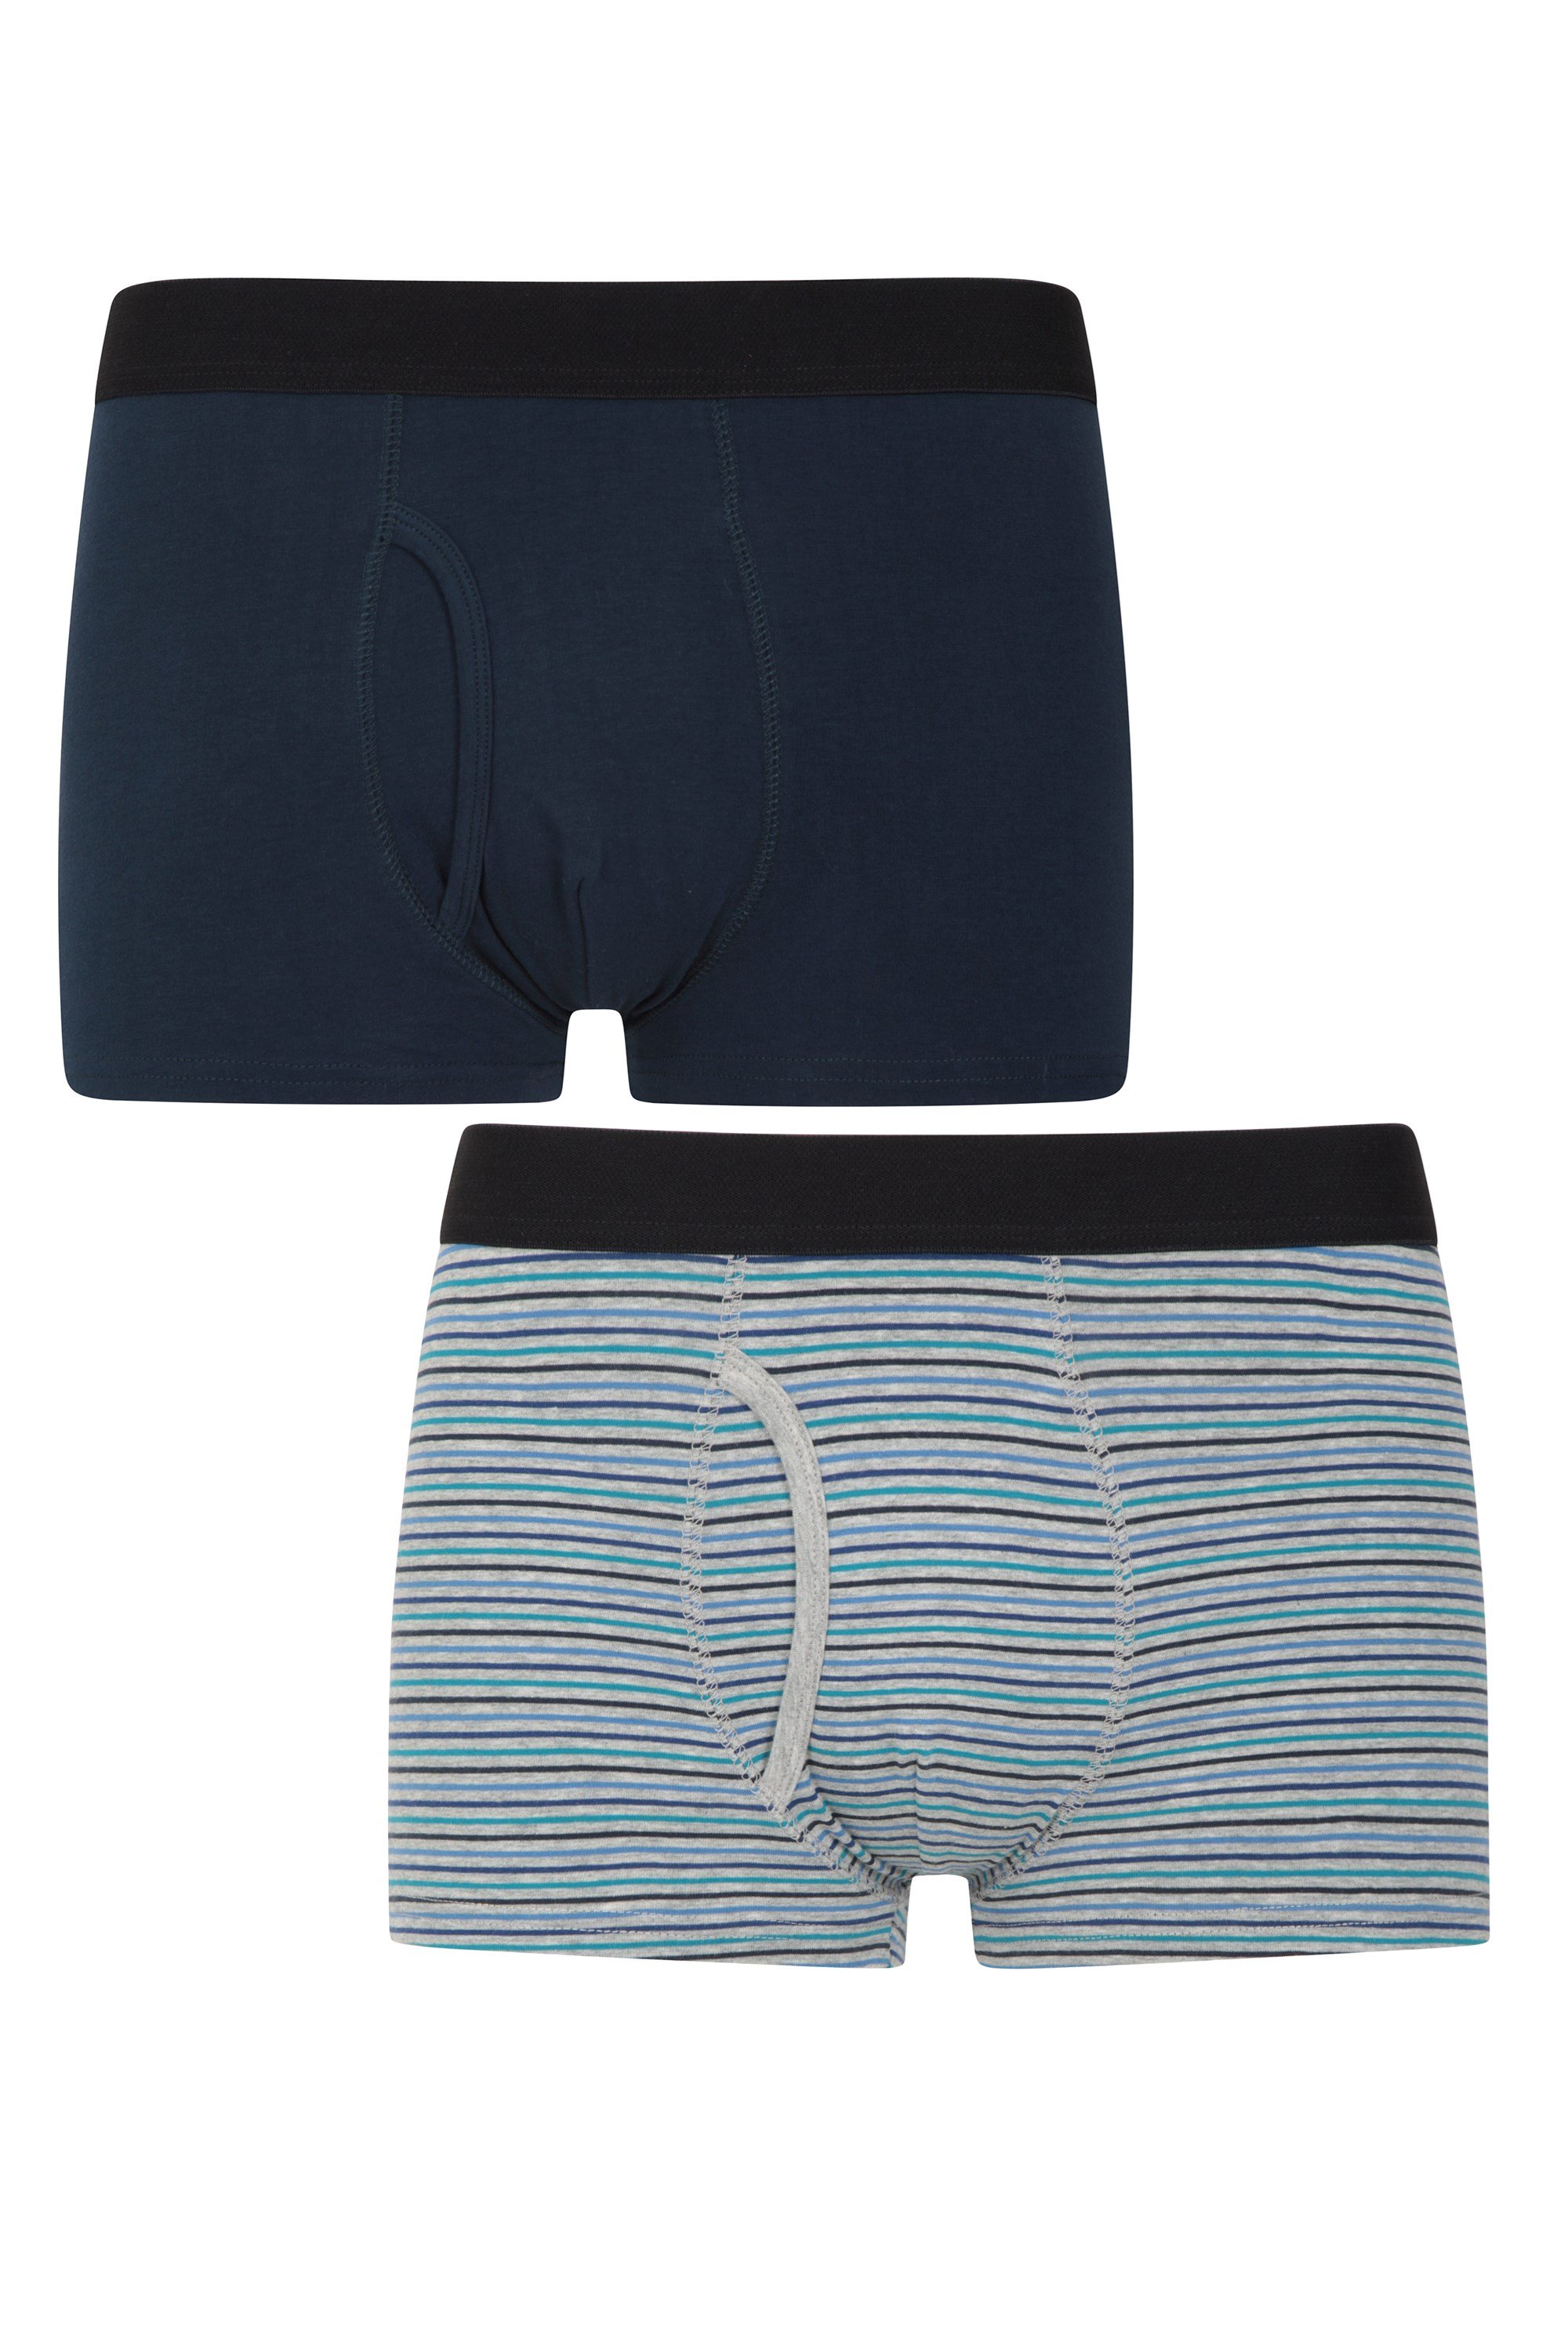 Mens Striped Boxers 2-pack - Blue